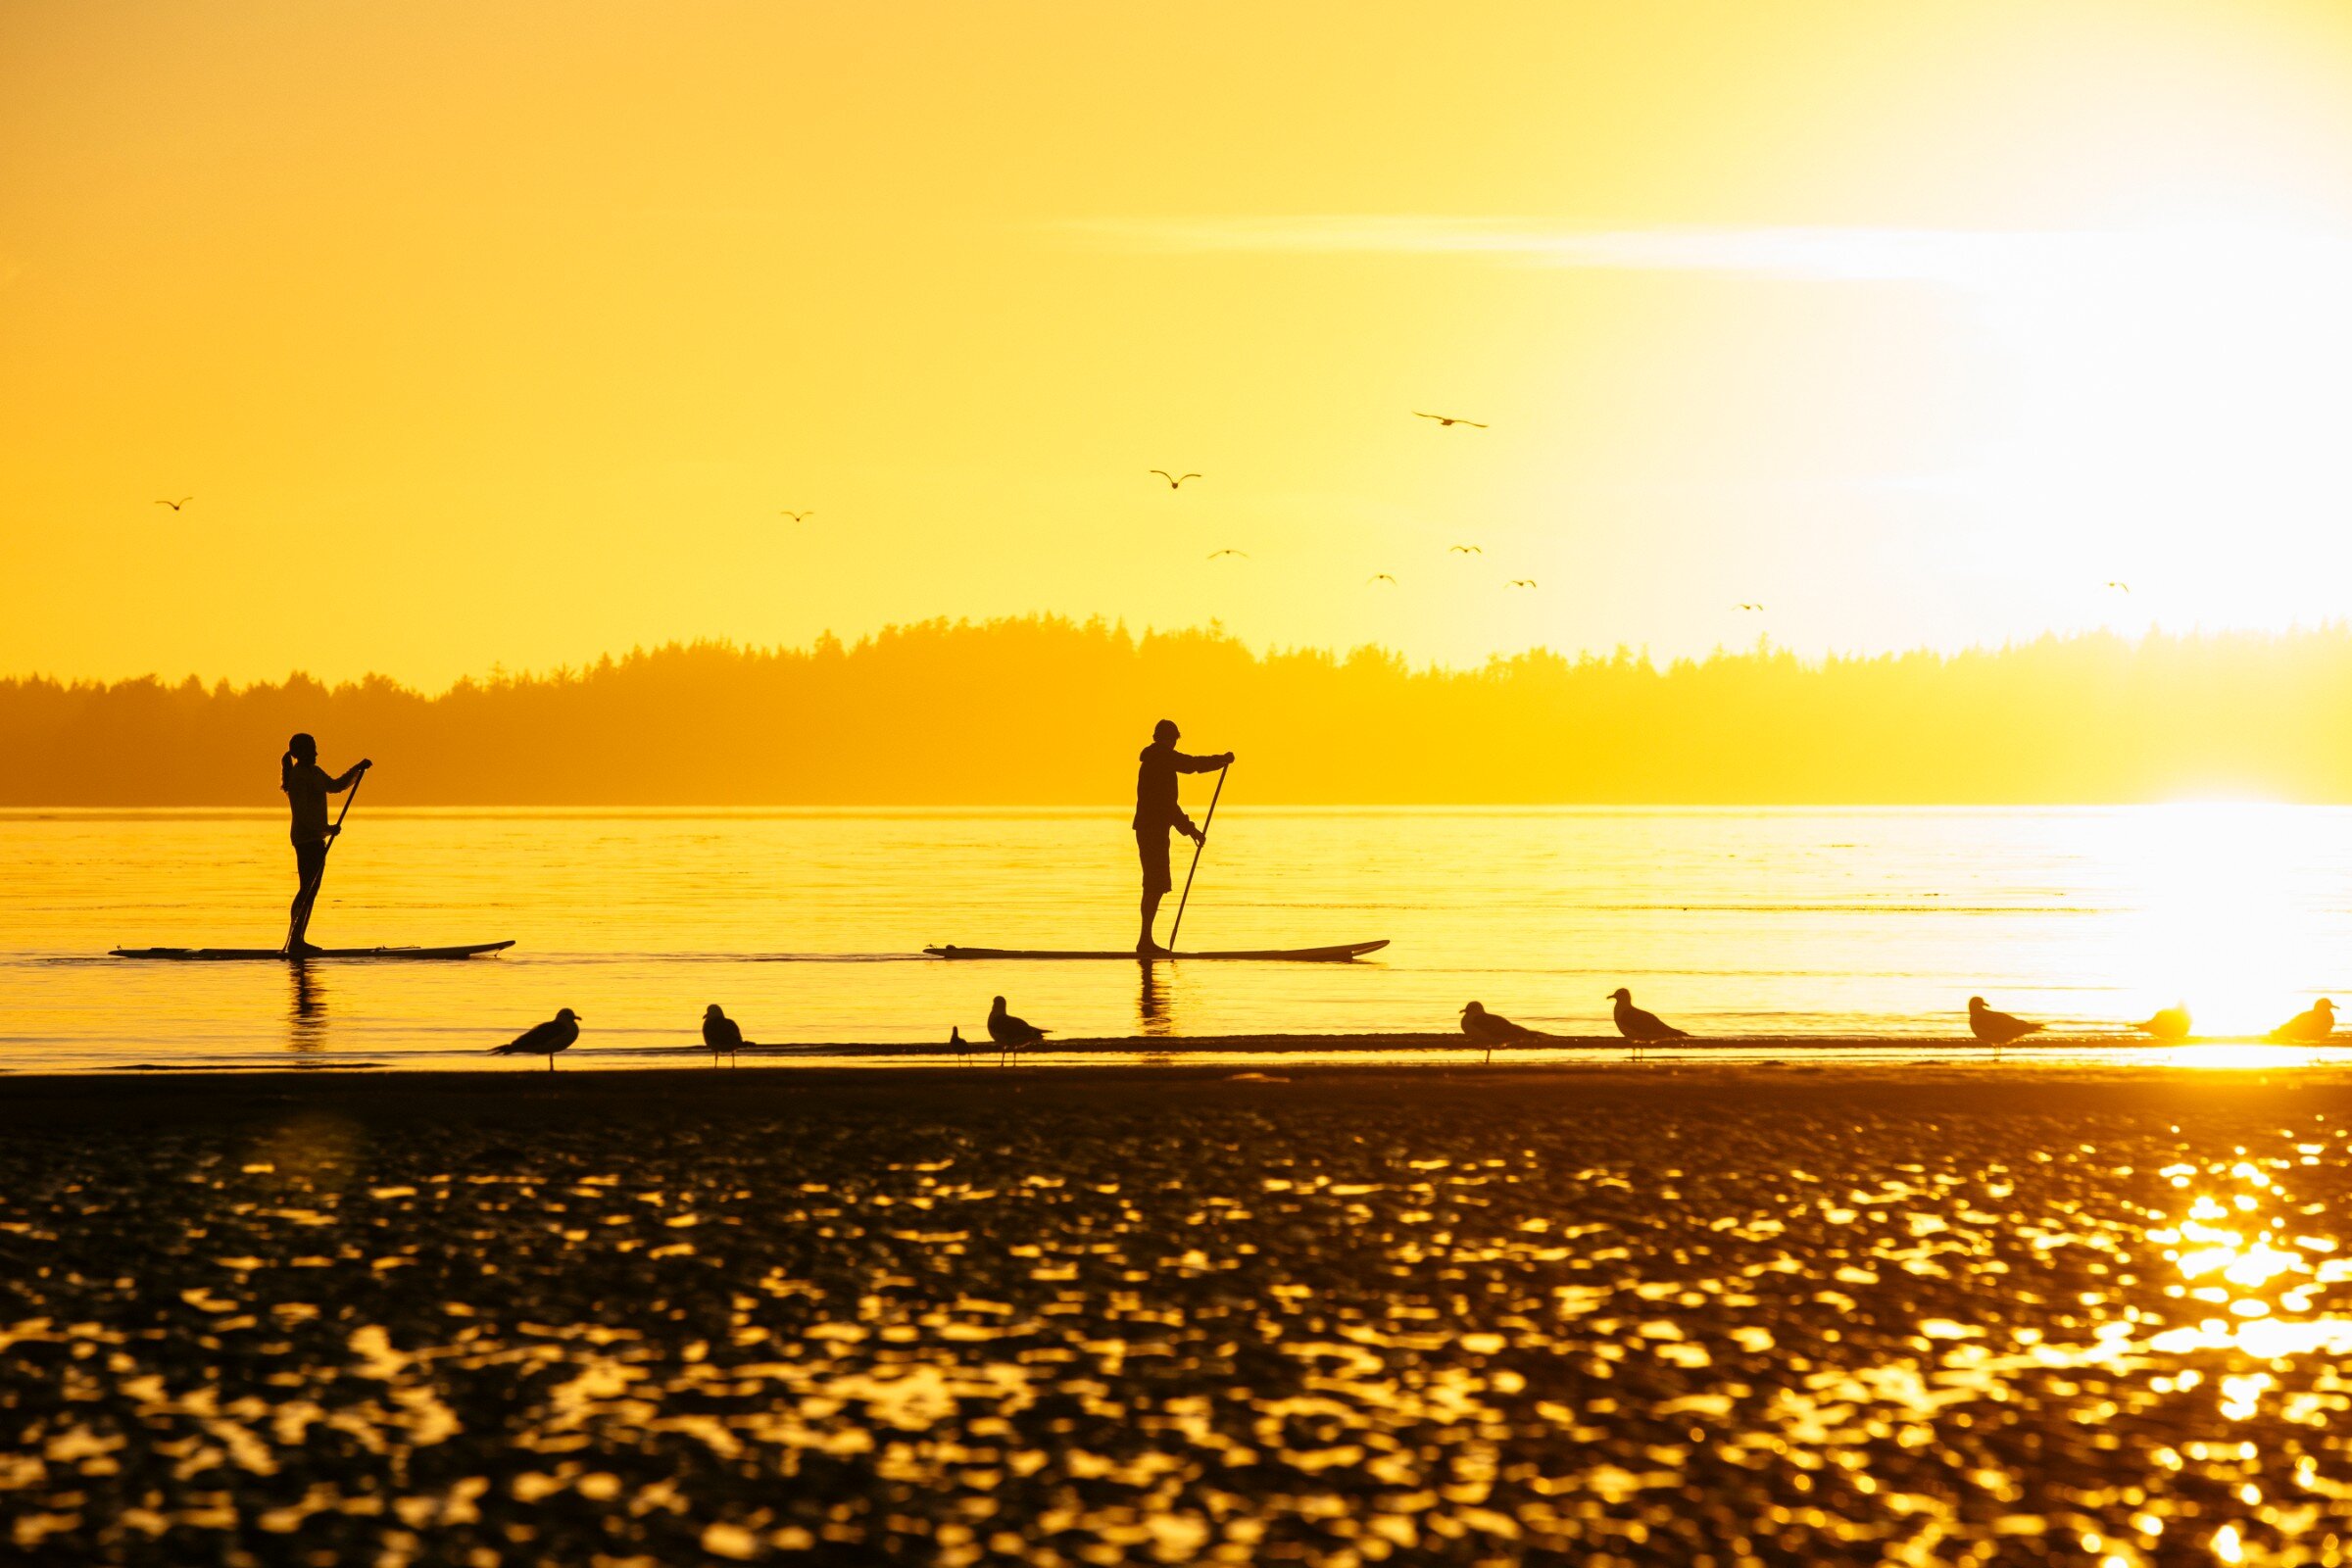 two people stand up paddleboarding in bright sunlight